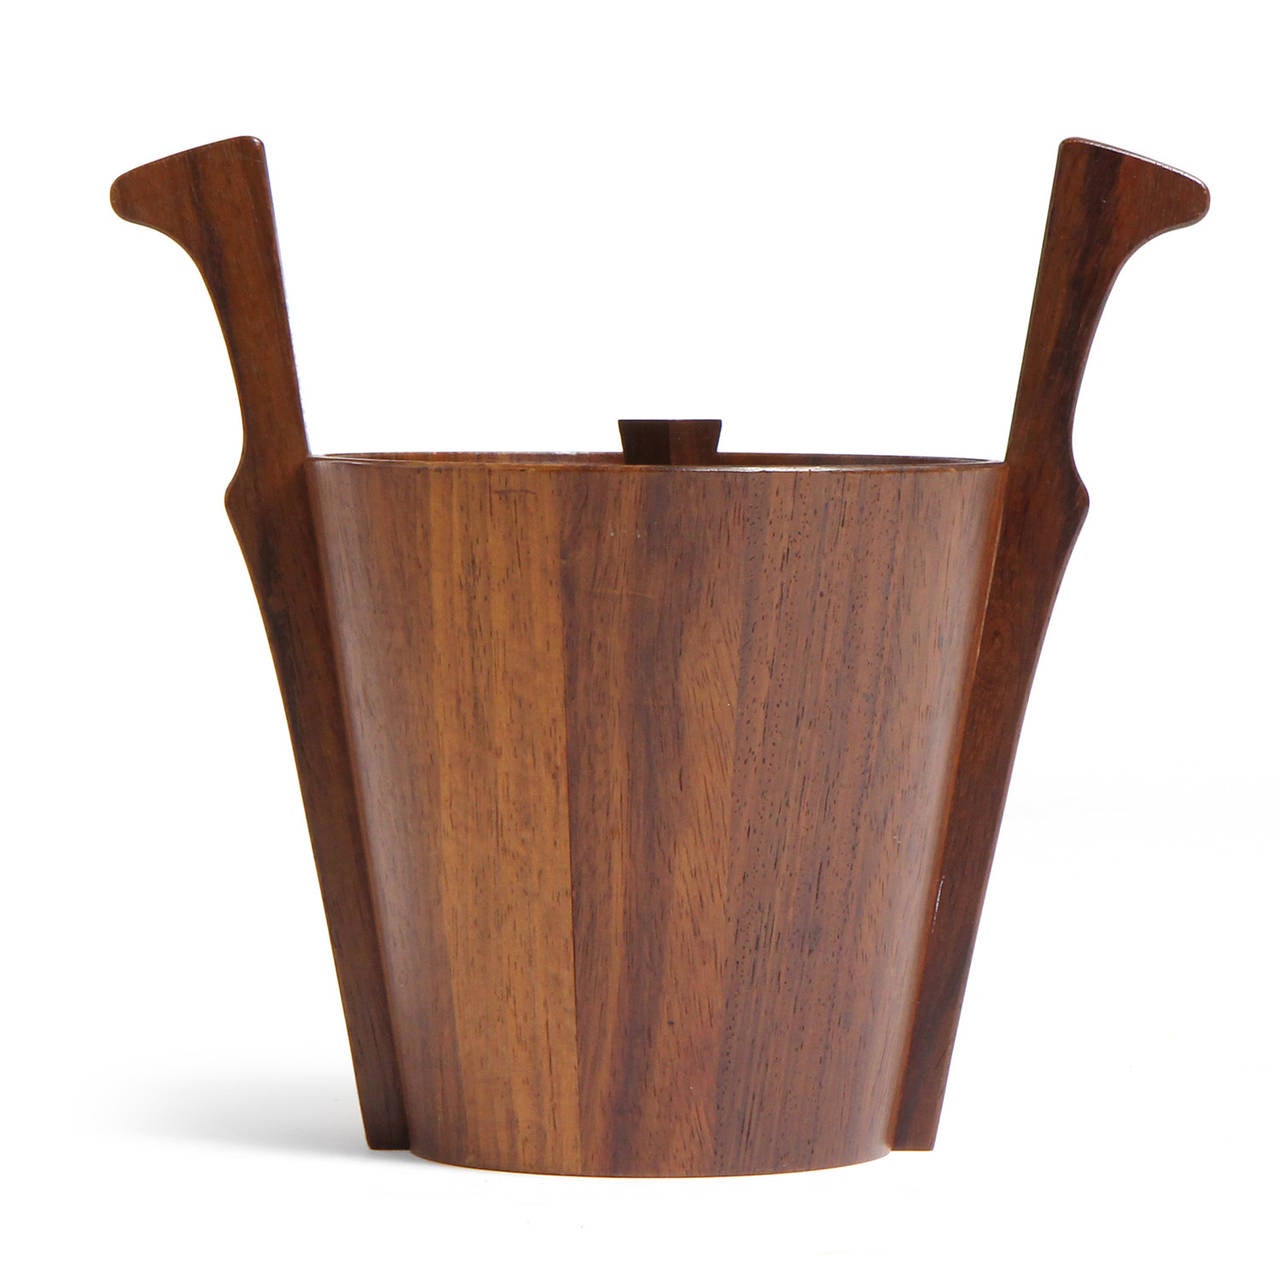 A dramatic and well-scaled conical ice bucket in rich staved teak having expressive flaring and carved applied handles.